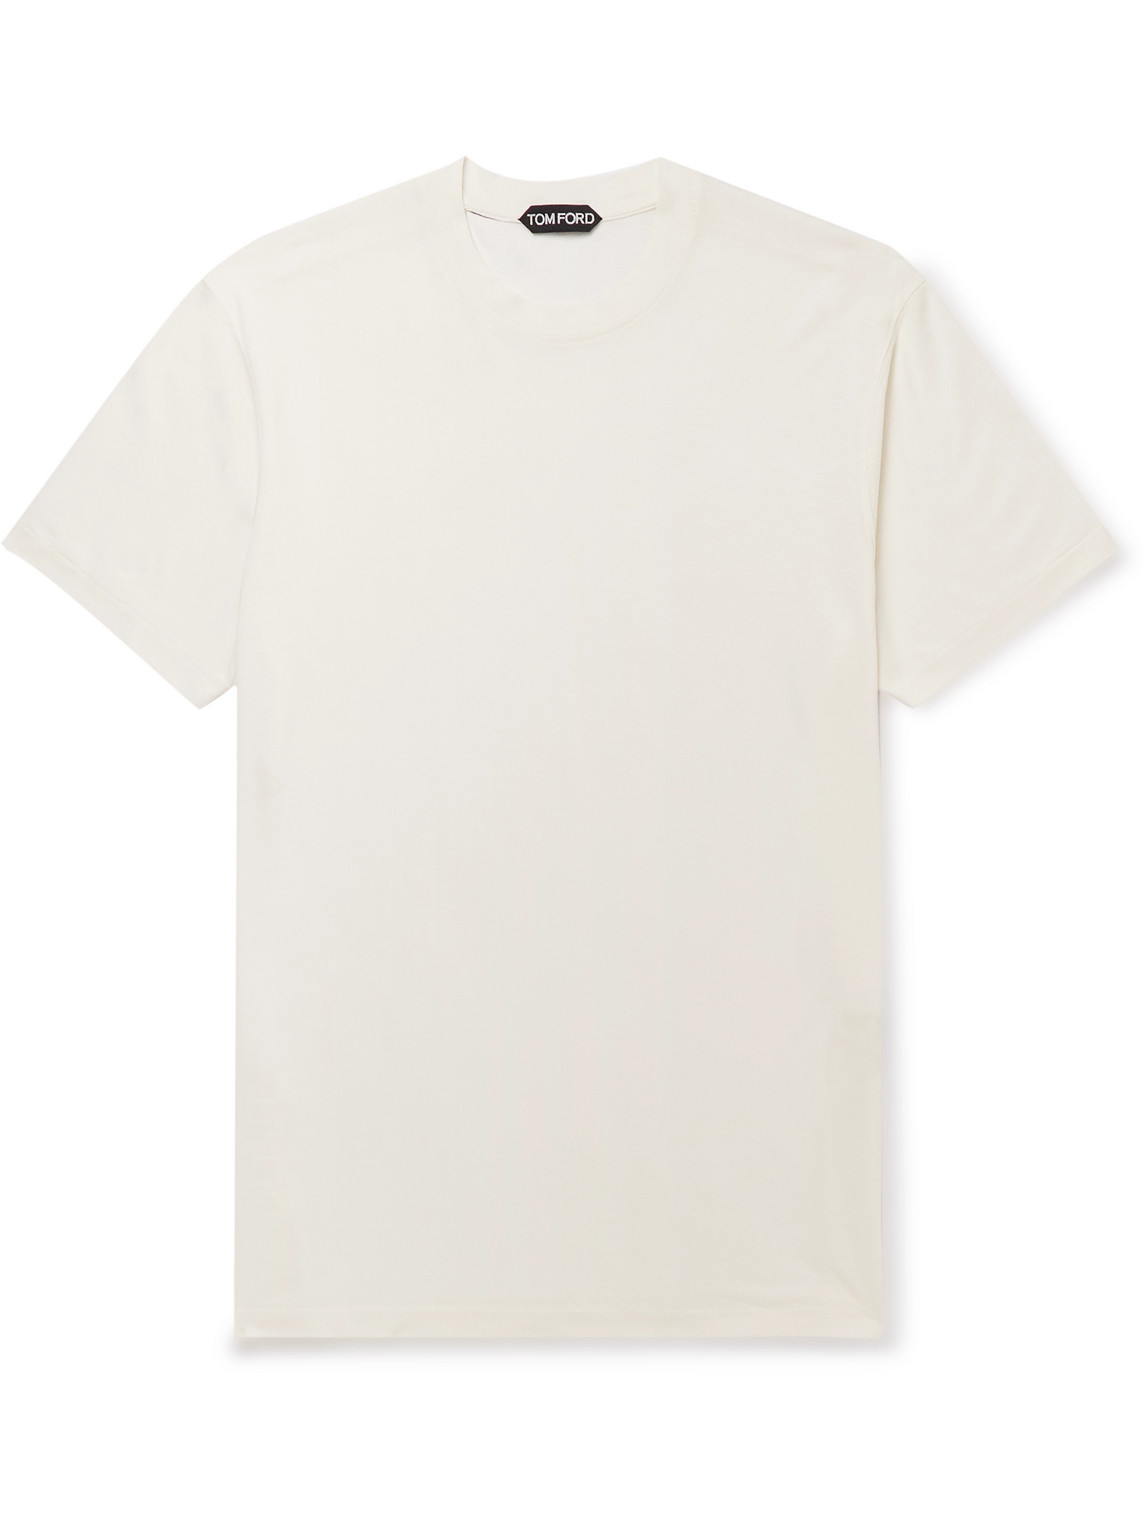 TOM FORD - Lyocell and Cotton-Blend Jersey T-Shirt - Men - White - IT 44 von TOM FORD